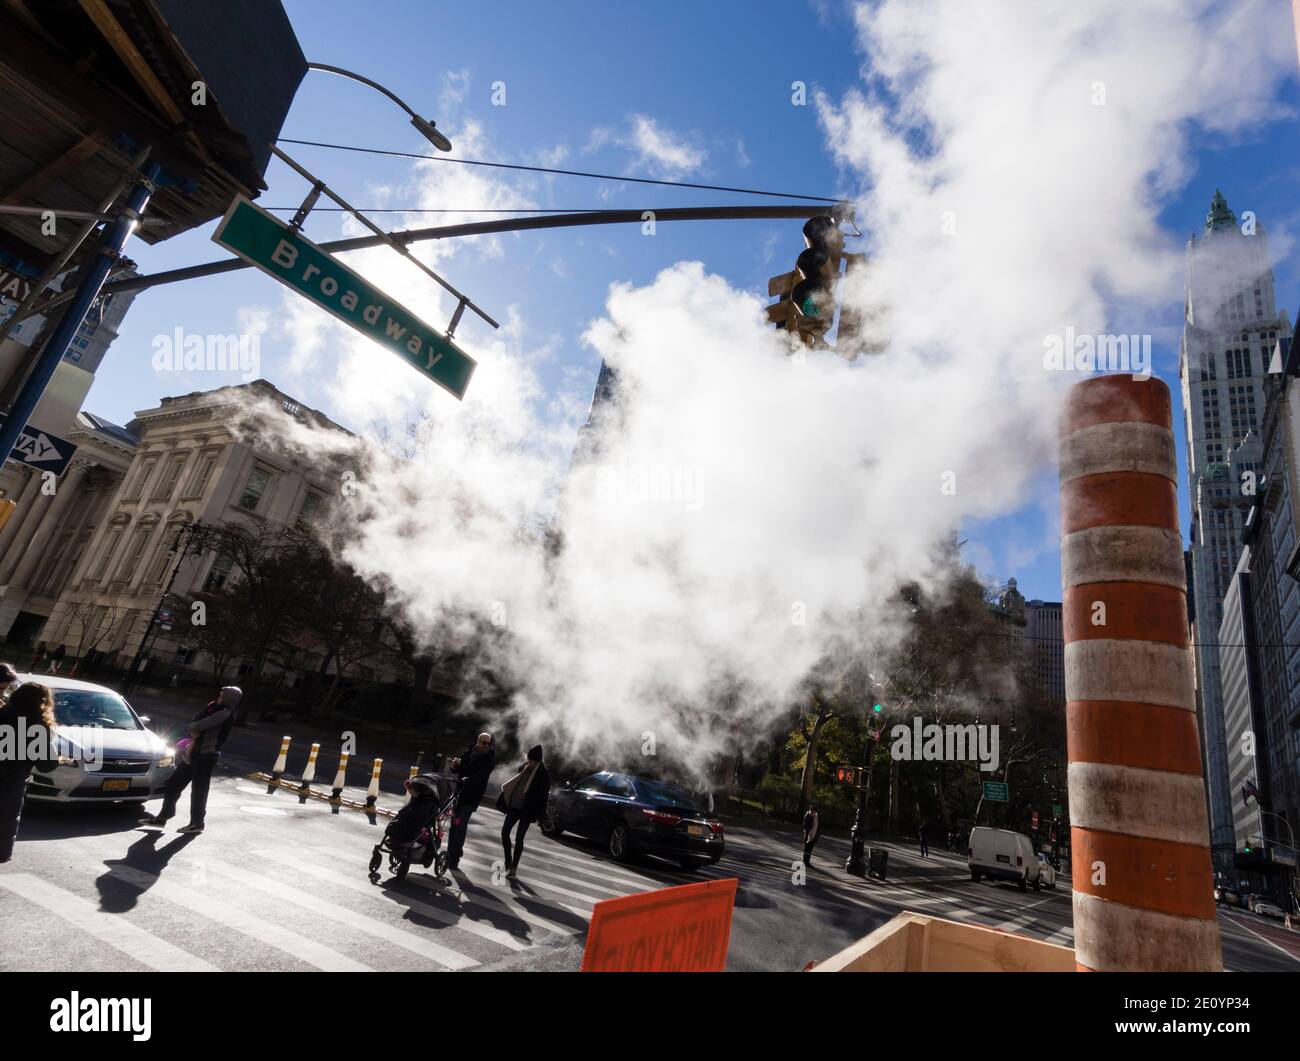 New York City, NY (USA) - 16 November 2019: Steam vapor is raising from the New York City steam systems at a corner of Broadway, NYC. Stock Photo